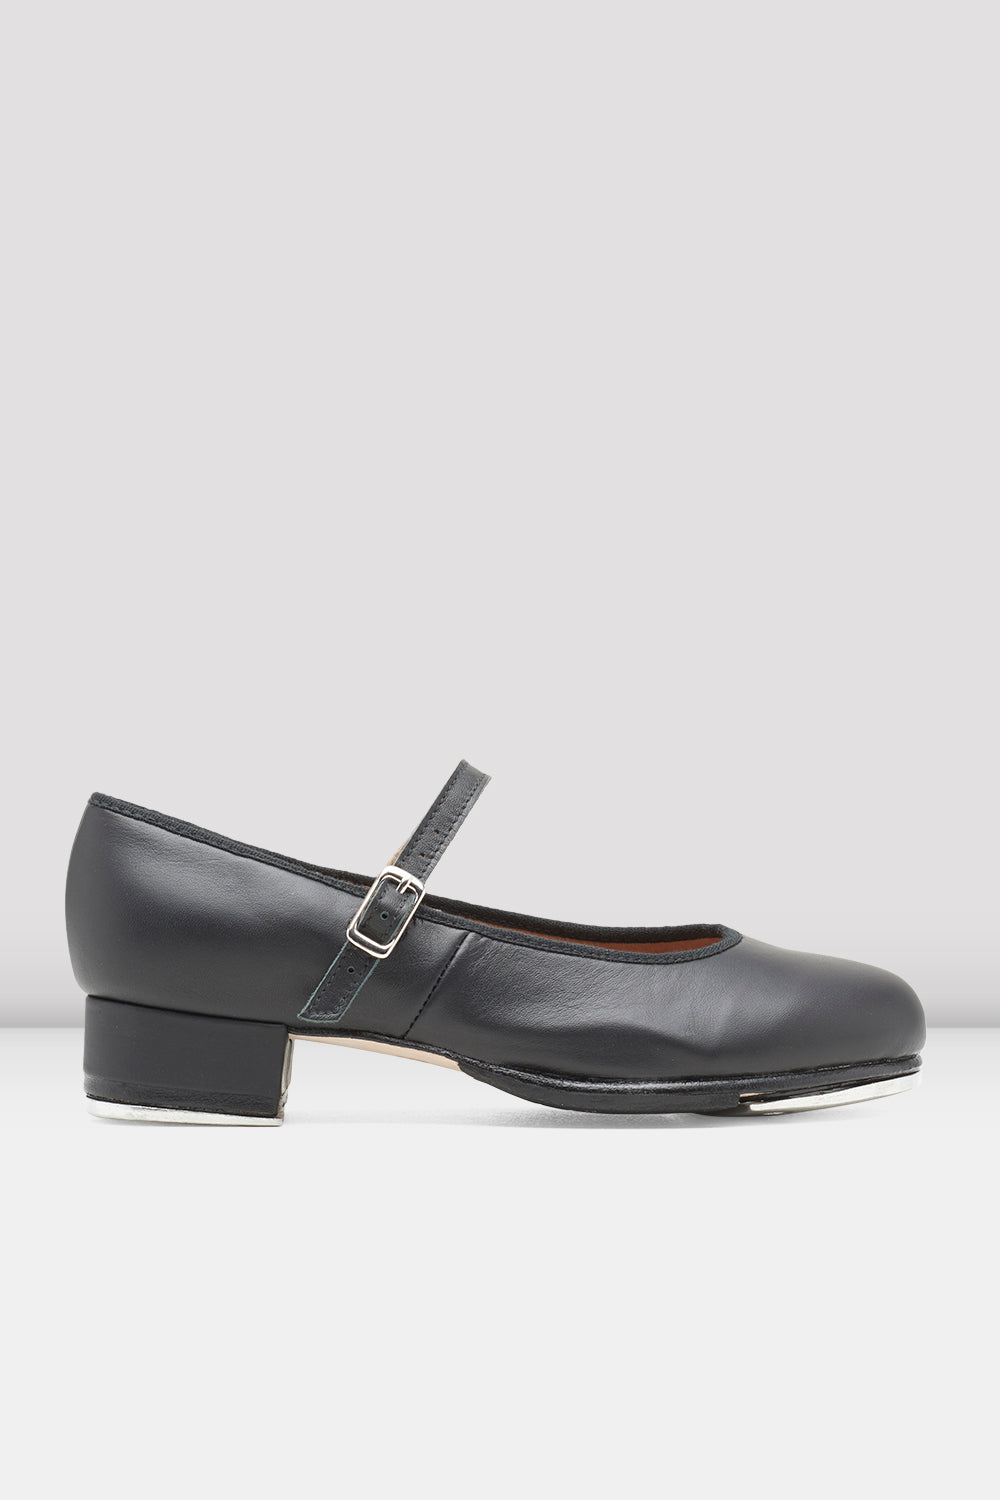 BLOCH Ladies Tap-On Leather Tap Shoes, Black Leather